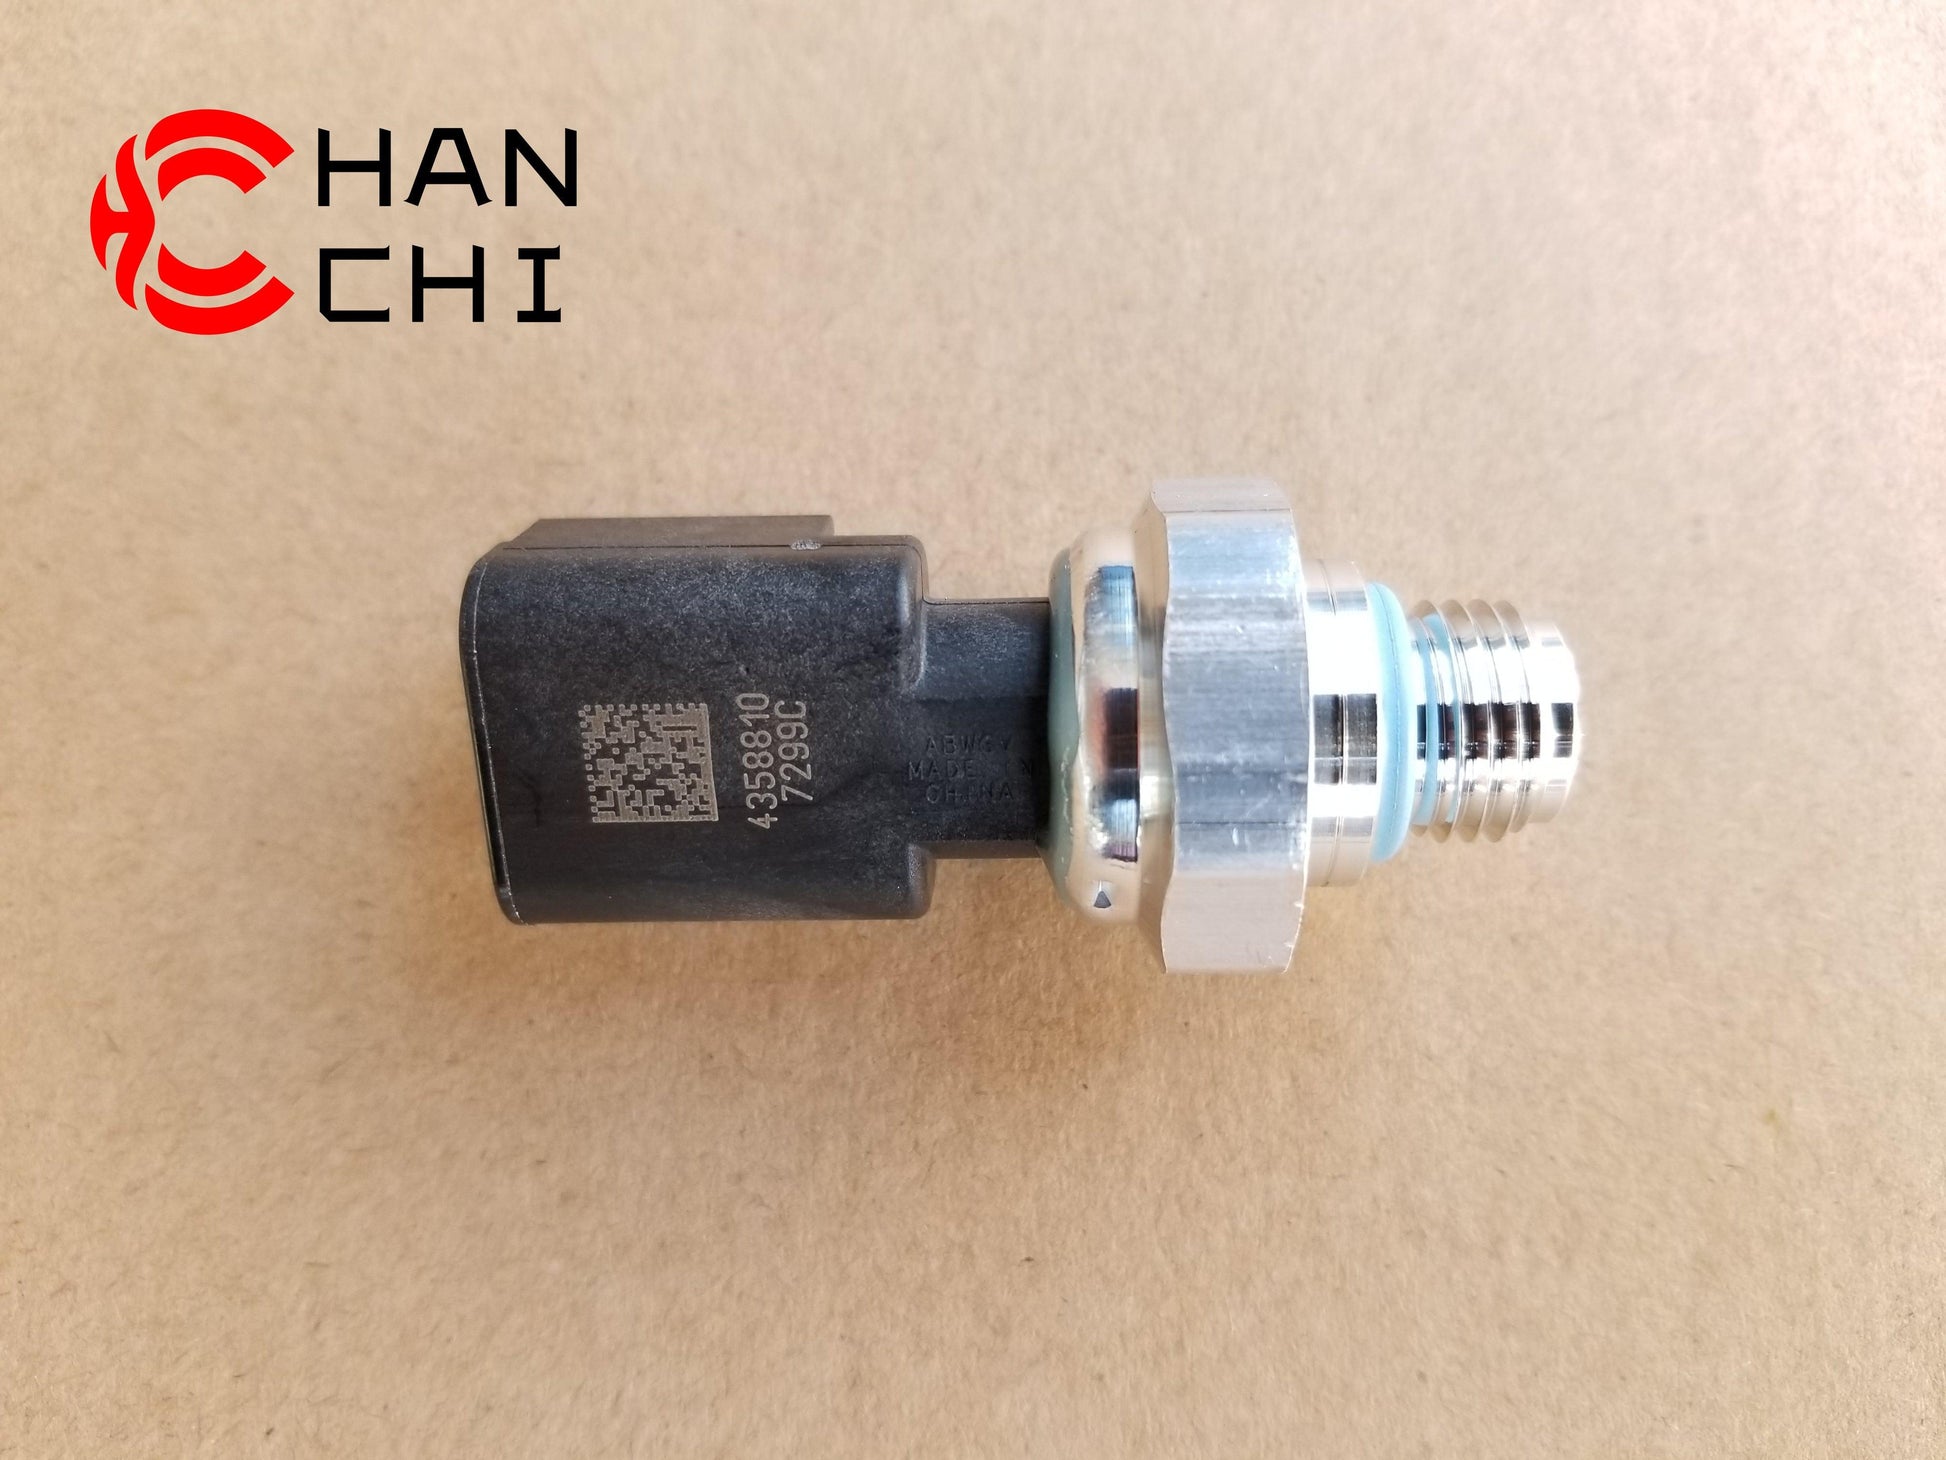 【Description】---☀Welcome to HANCHI☀---✔Good Quality✔Generally Applicability✔Competitive PriceEnjoy your shopping time↖（^ω^）↗【Features】Brand-New with High Quality for the Aftermarket.Totally mathced your need.**Stable Quality**High Precision**Easy Installation**【Specification】OEM：4358810Material：metalColor：silverOrigin：Made in ChinaWeight：100g【Packing List】1*oil pressure sensor